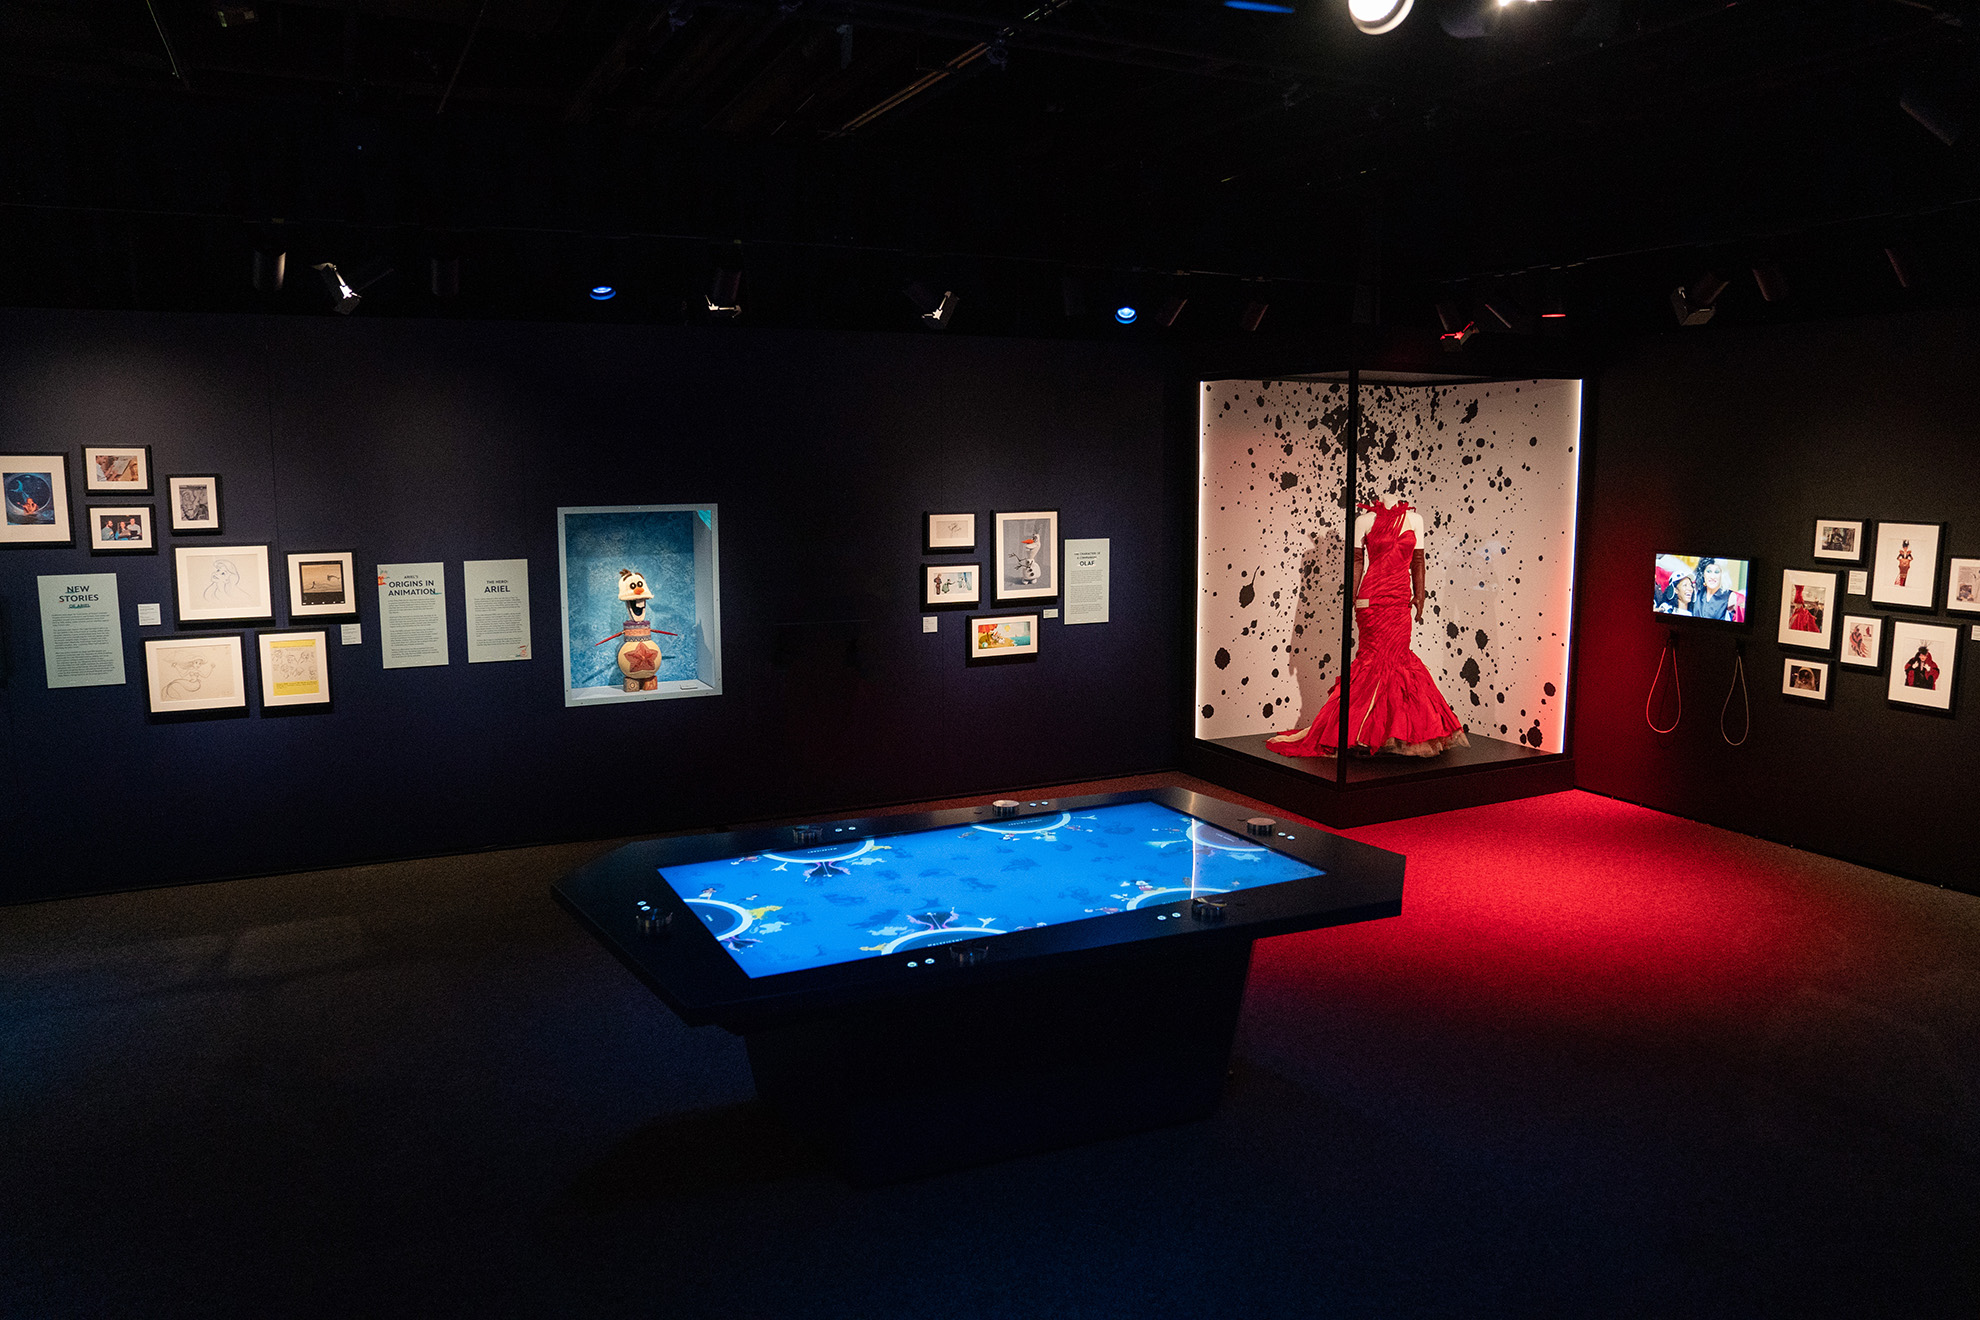 The Illusion of Life gallery at Disney100: The Exhibition, now open at The Franklin Institute in Philadelphia.